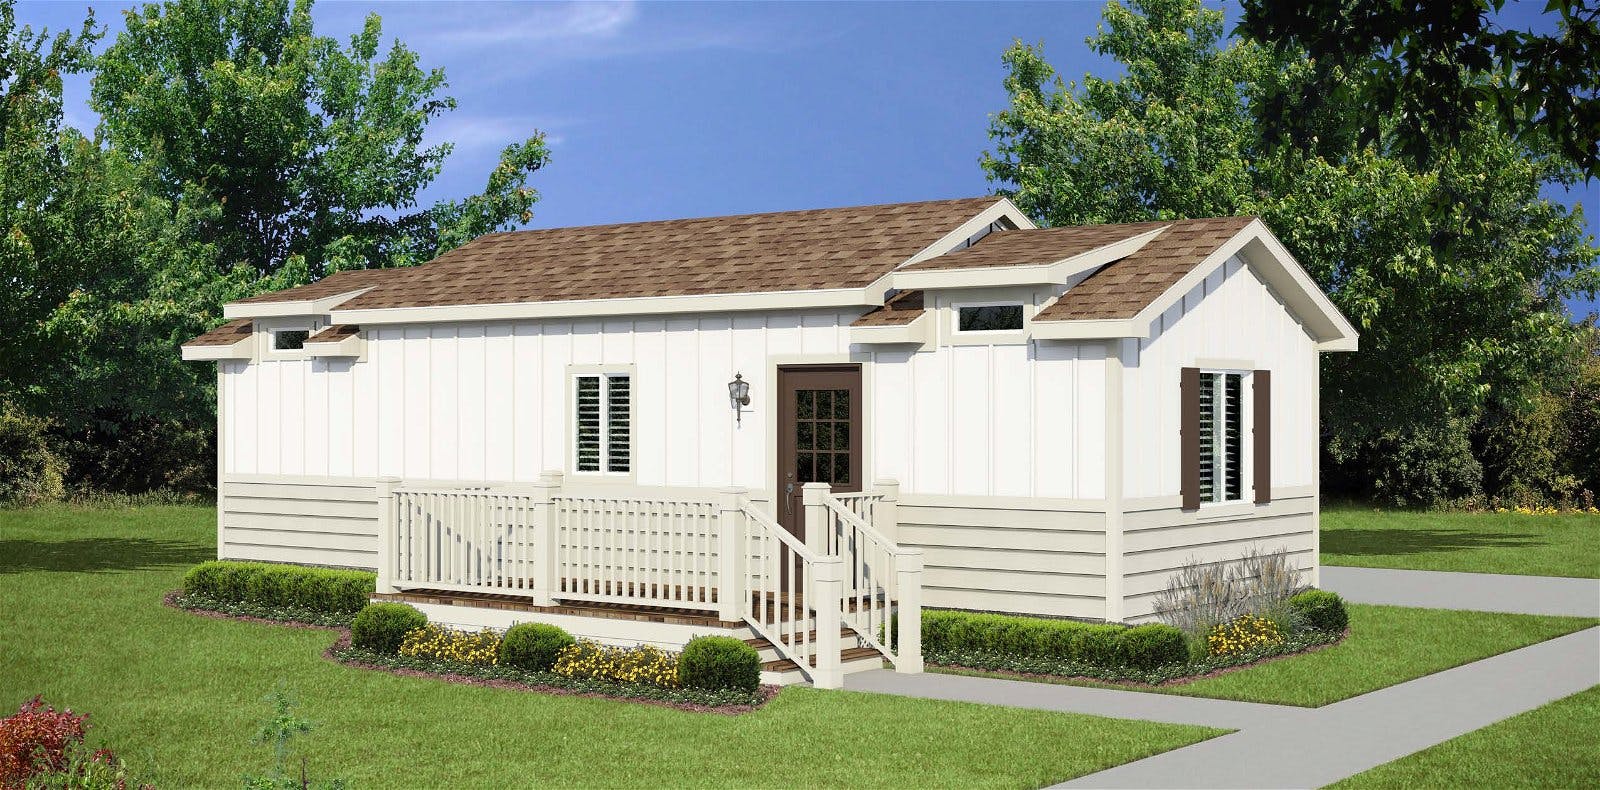 Bd 83 hero, elevation, and exterior home features